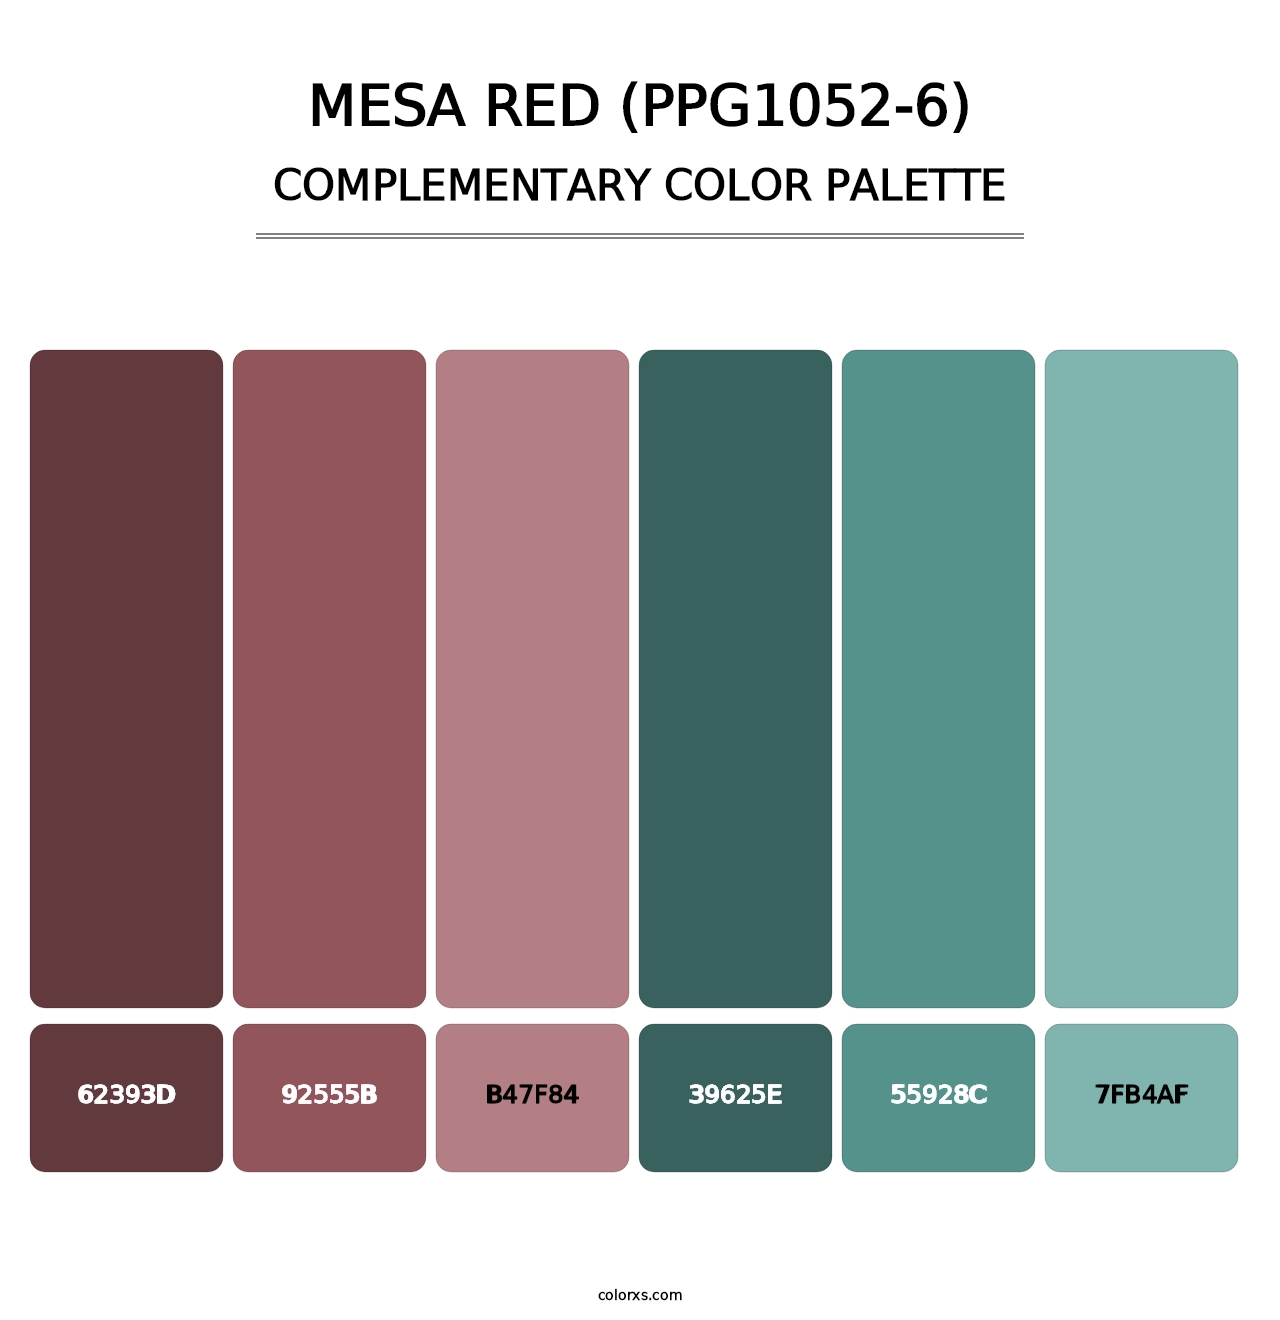 Mesa Red (PPG1052-6) - Complementary Color Palette